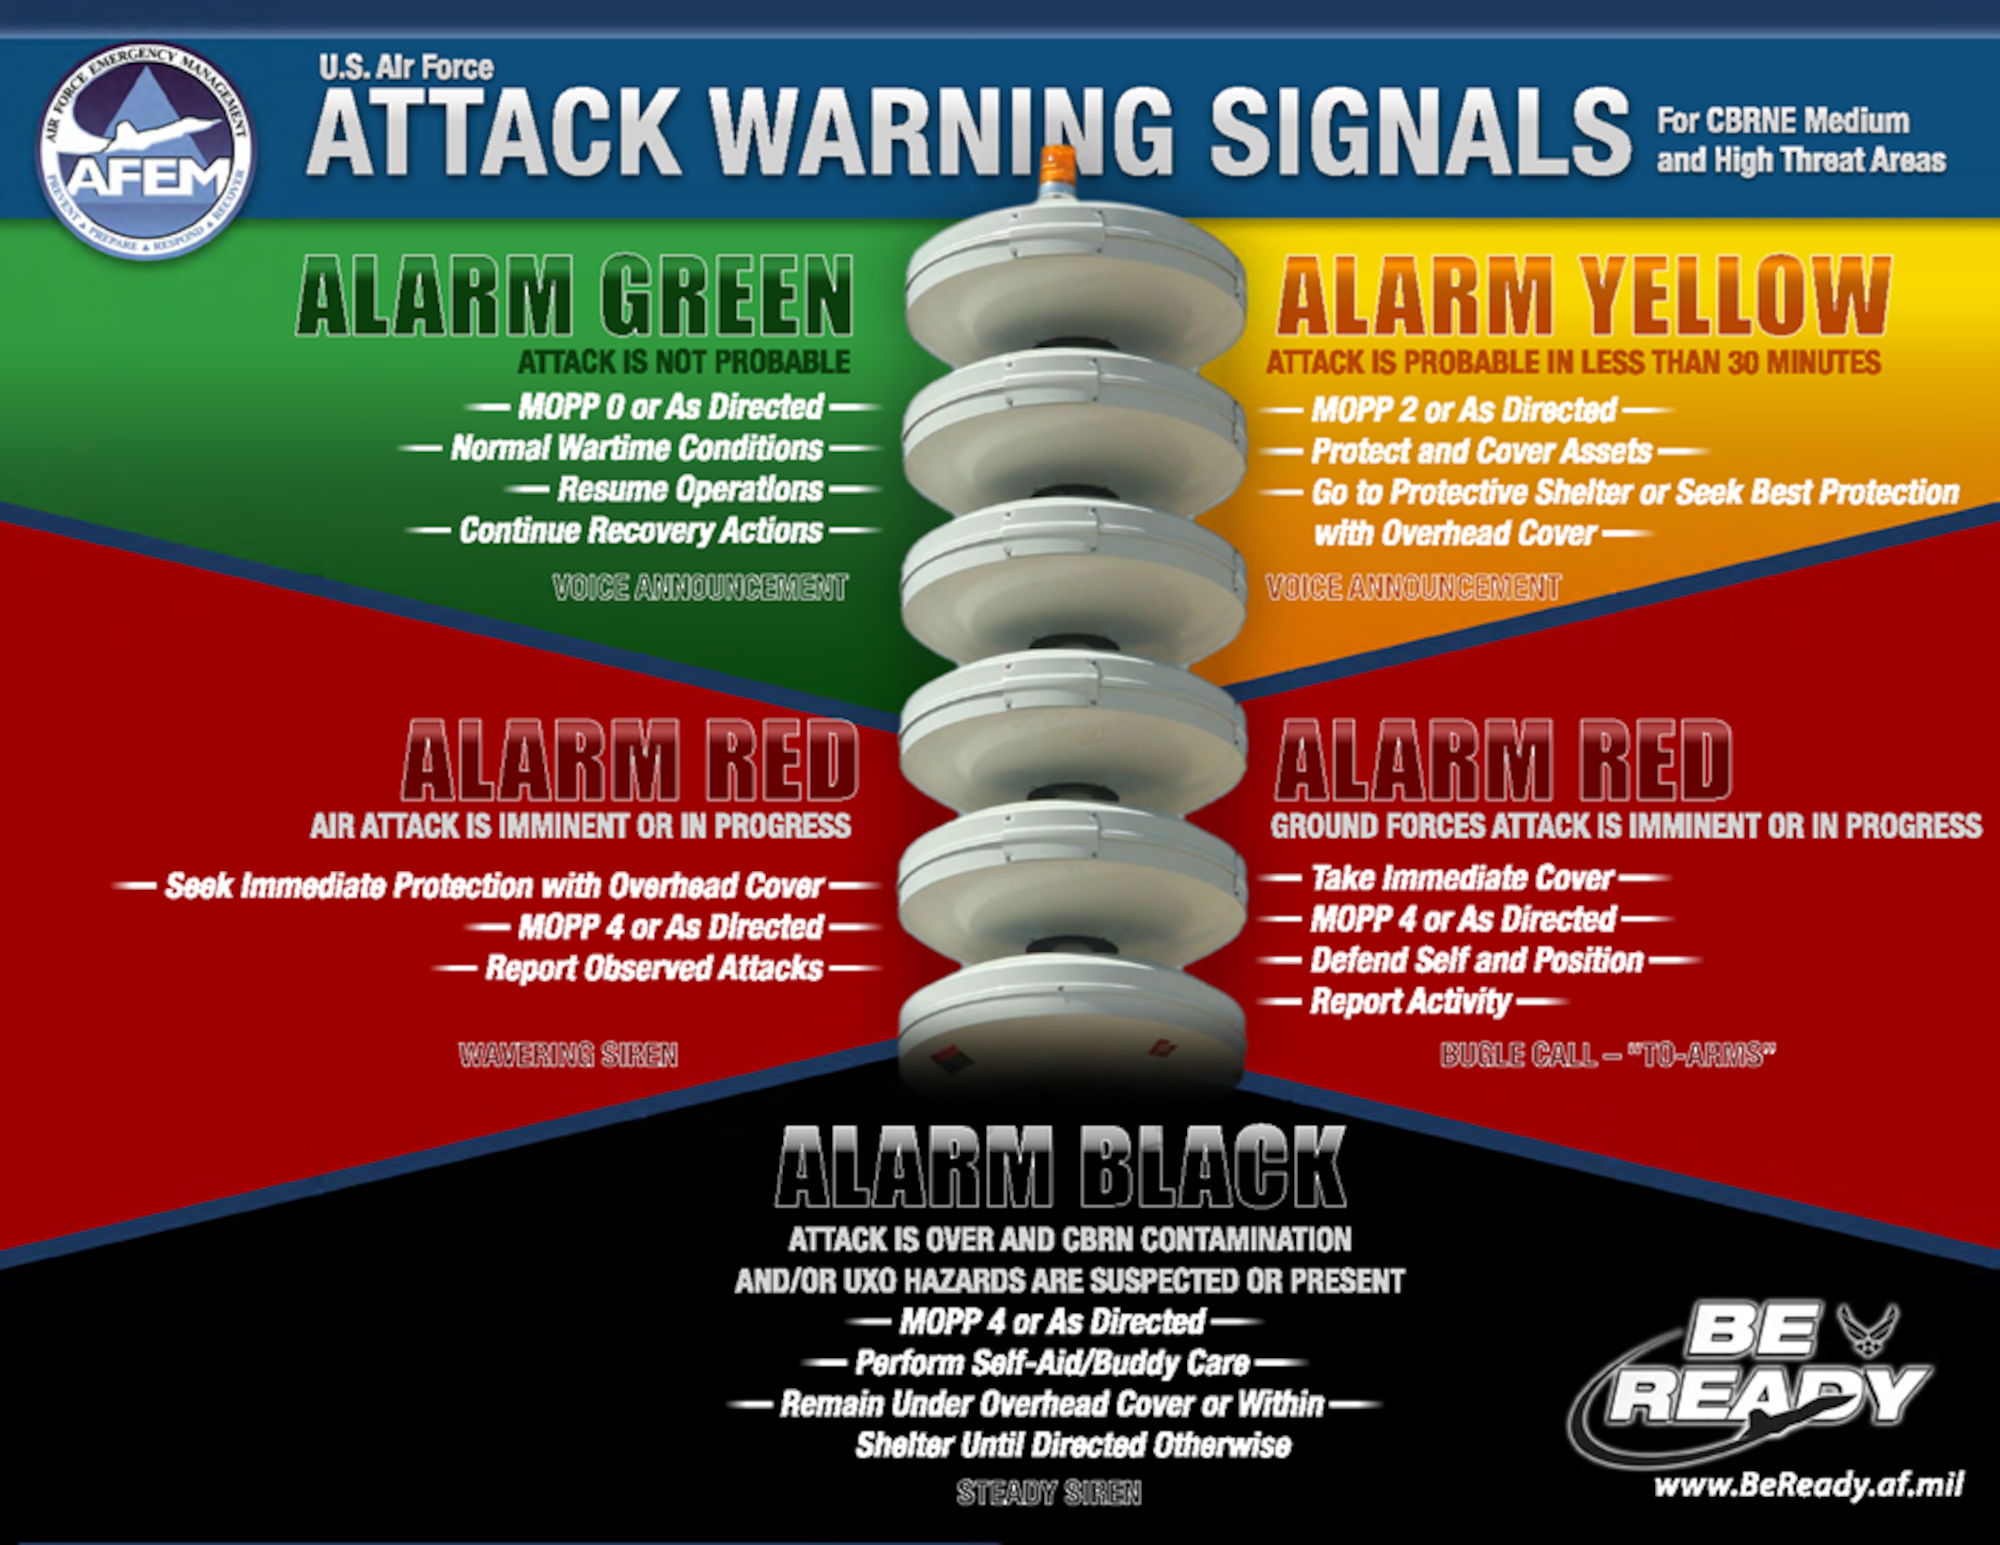 An infographic explaining attack warning signals.